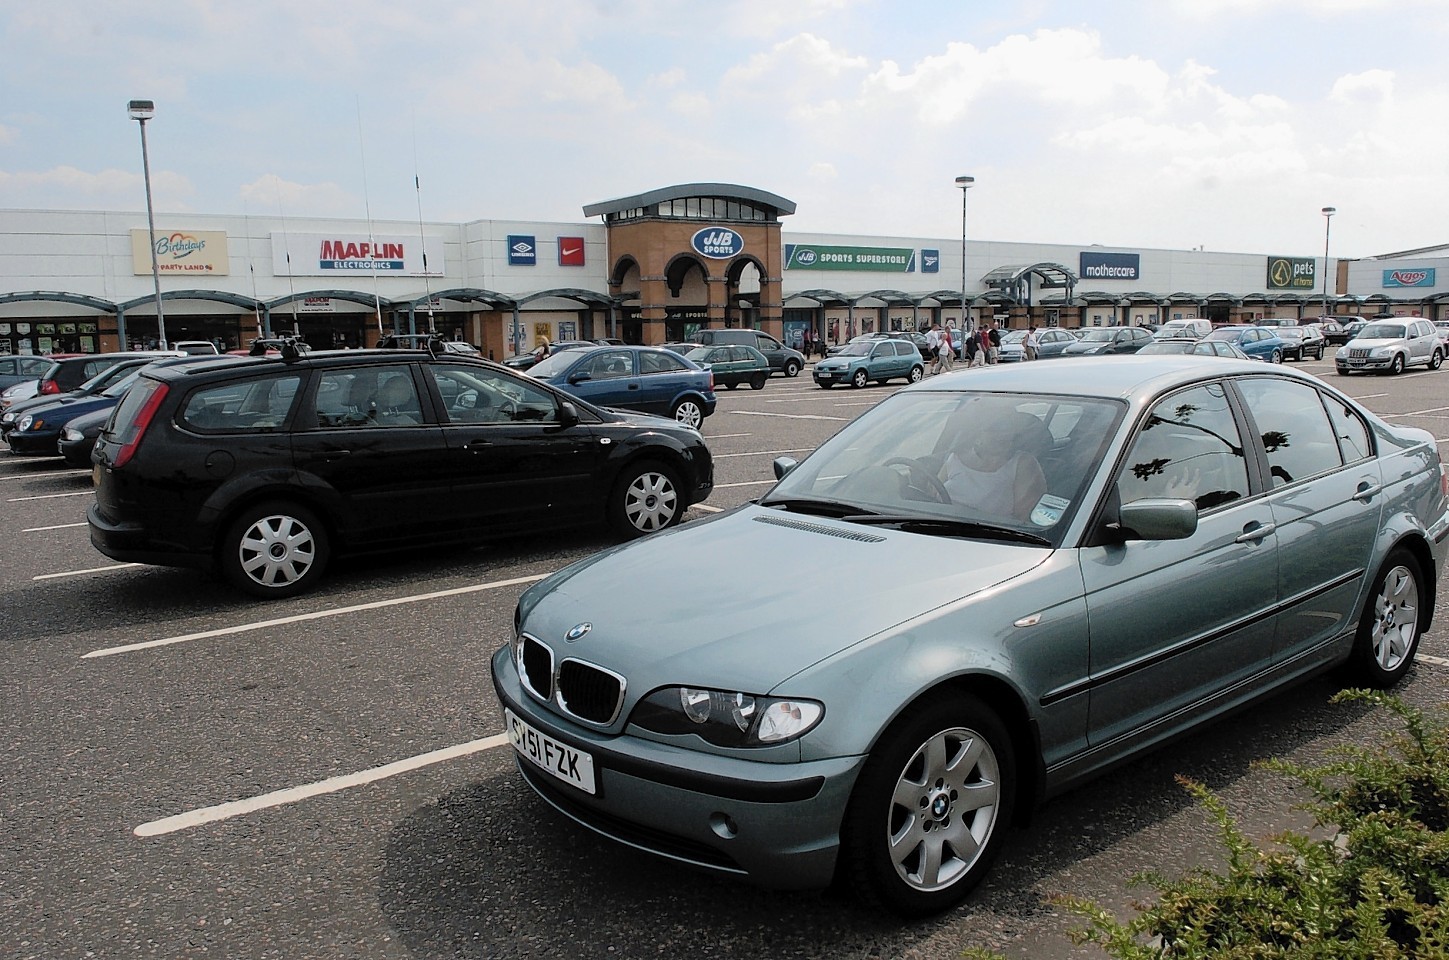 A petition is urging expansion at a city retail park